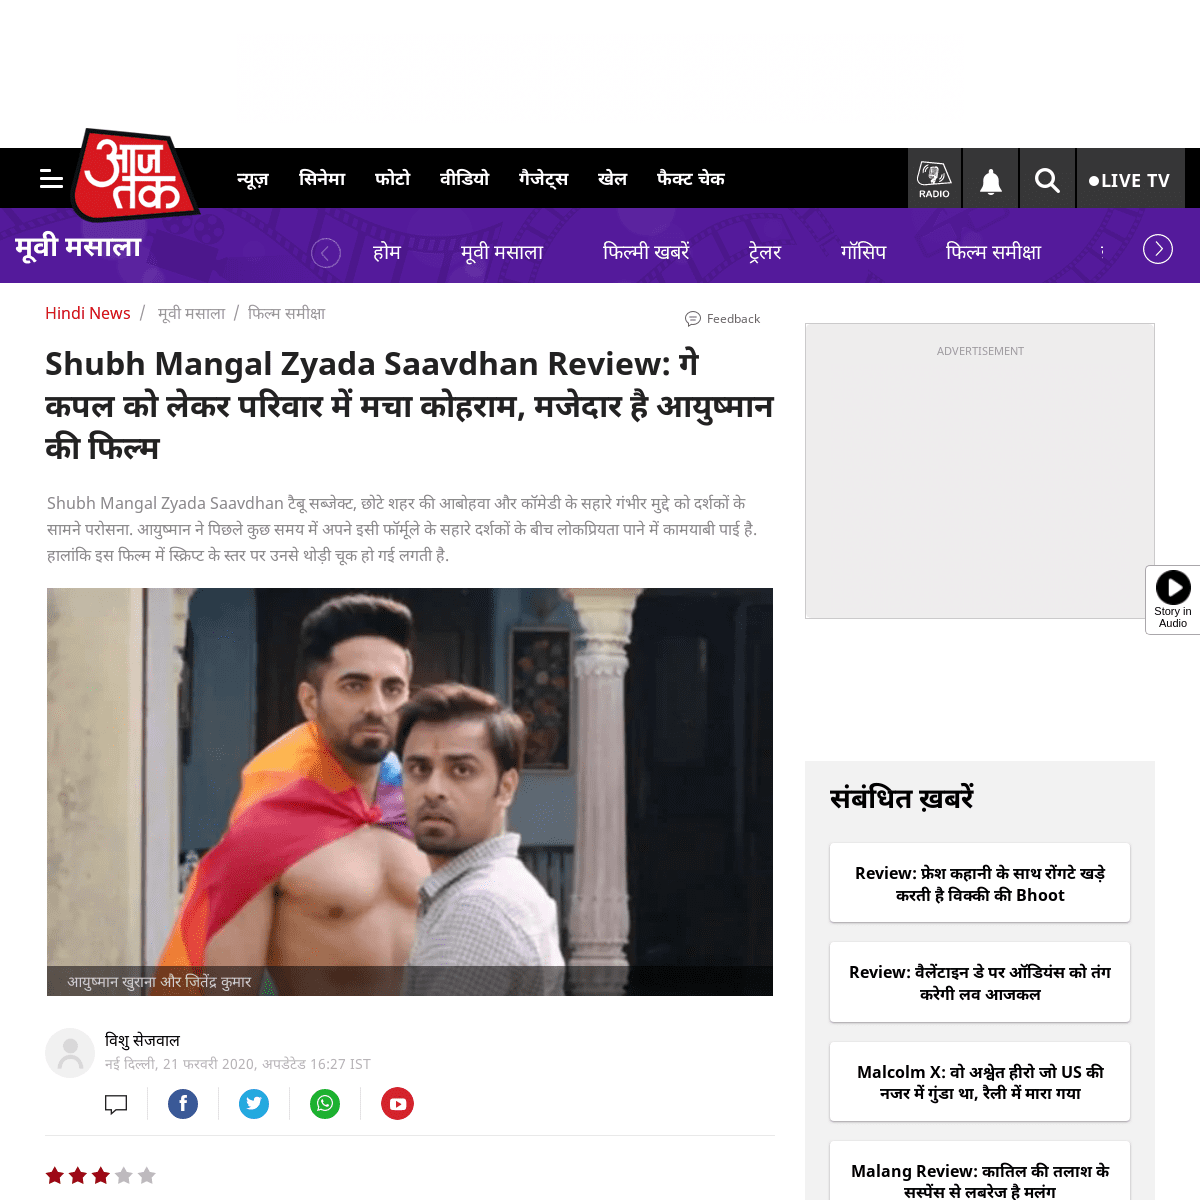 A complete backup of aajtak.intoday.in/story/shubh-magal-zyada-saavdhaan-review-aayushman-khurana-film-talks-about-the-life-of-g